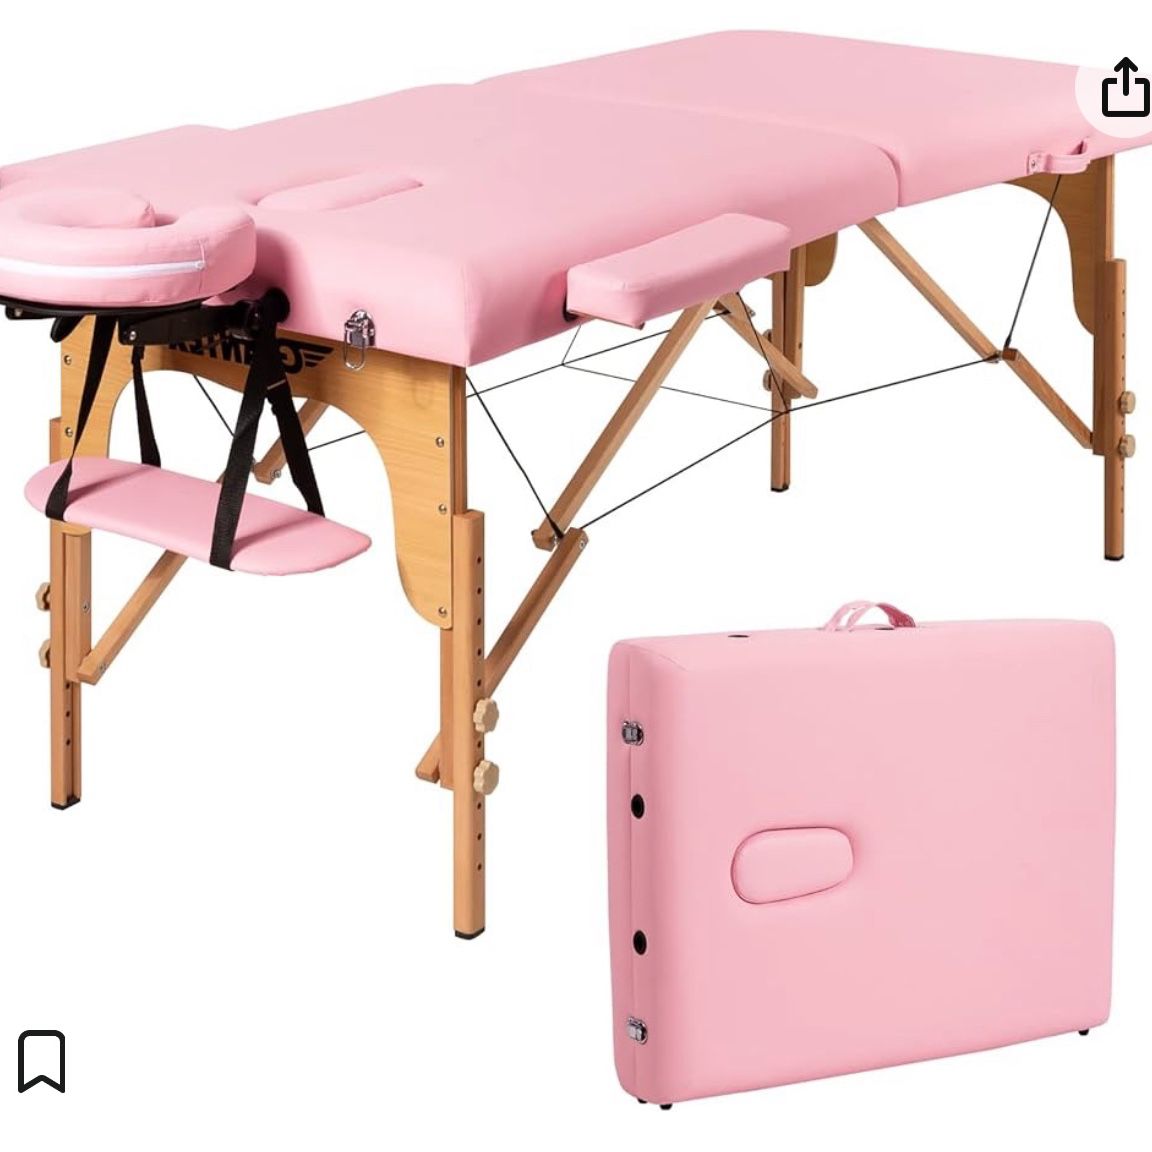 Portable Massage Table Lash Bed, Massage Bed Spa Bed Height Adjustable w/Face Cradle & Carry Case, Professional Facial Salon Tattoo Table for 